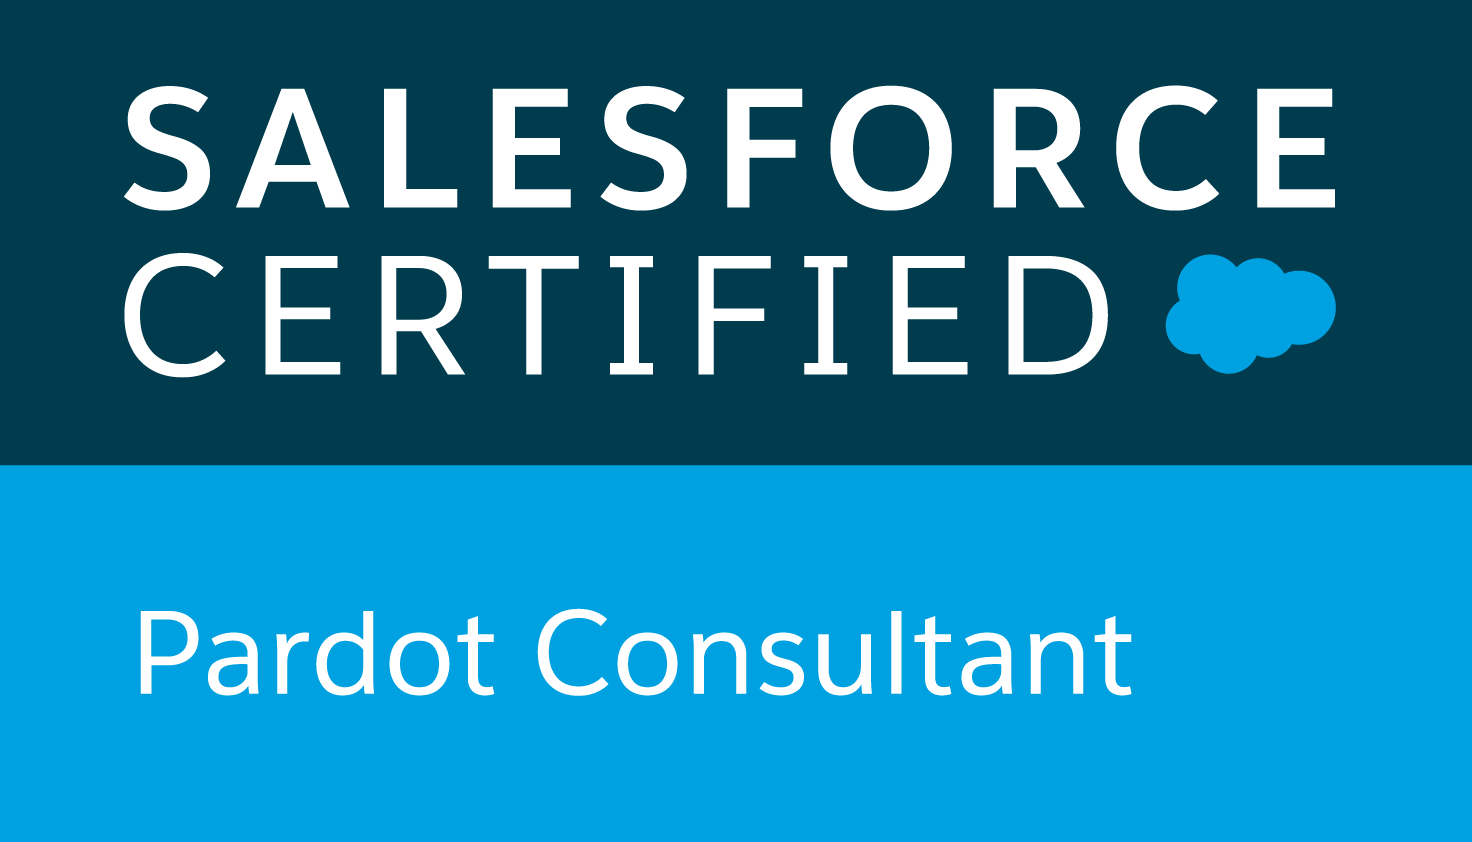 Salesforce Consulting Pardot